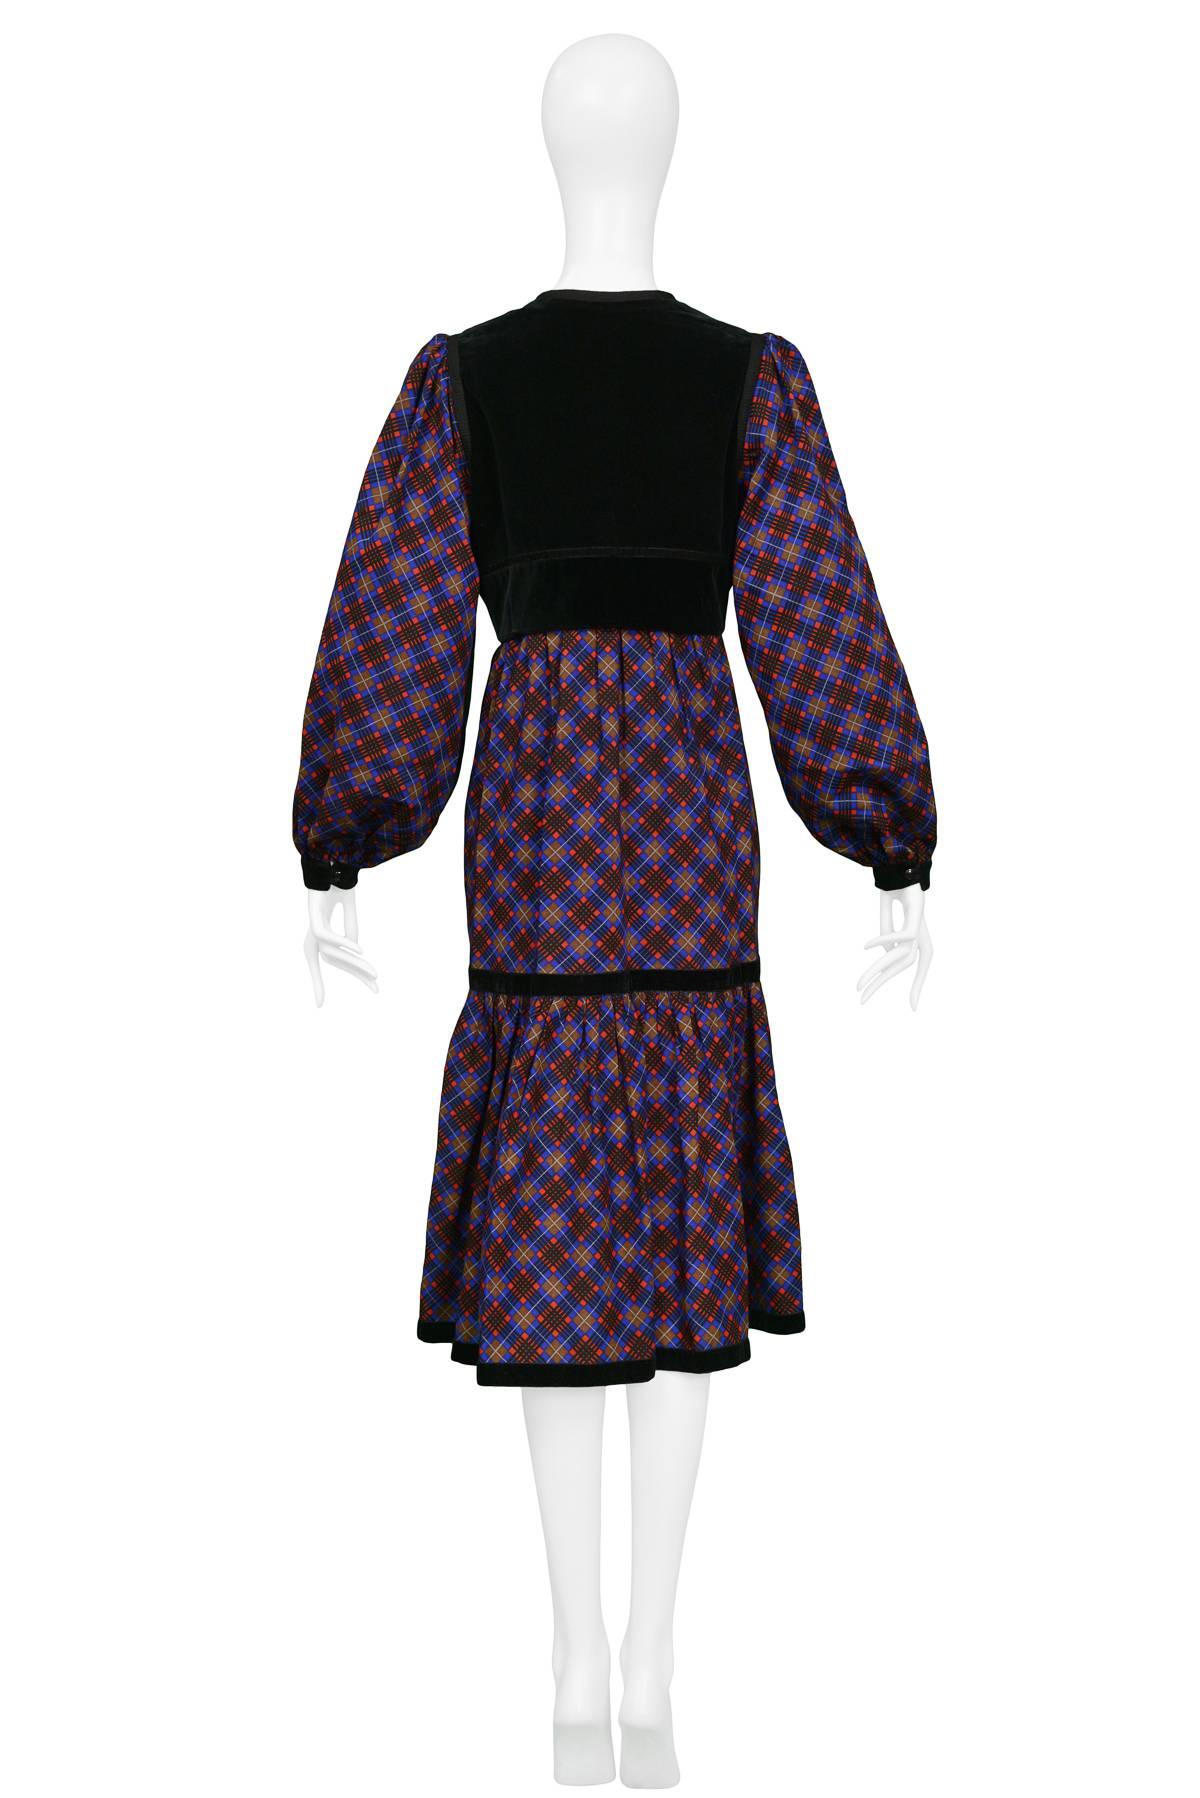 YVES SAINT LAURENT

VELVET & PLAID SMOCK DRESS
Condition : Excellent Vintage Condition
Vintage Yves Saint Laurent red, blue & brown wool plaid smock dress featuring a black velvet yoke with button closure at chest and black velvet cuffs and trim to